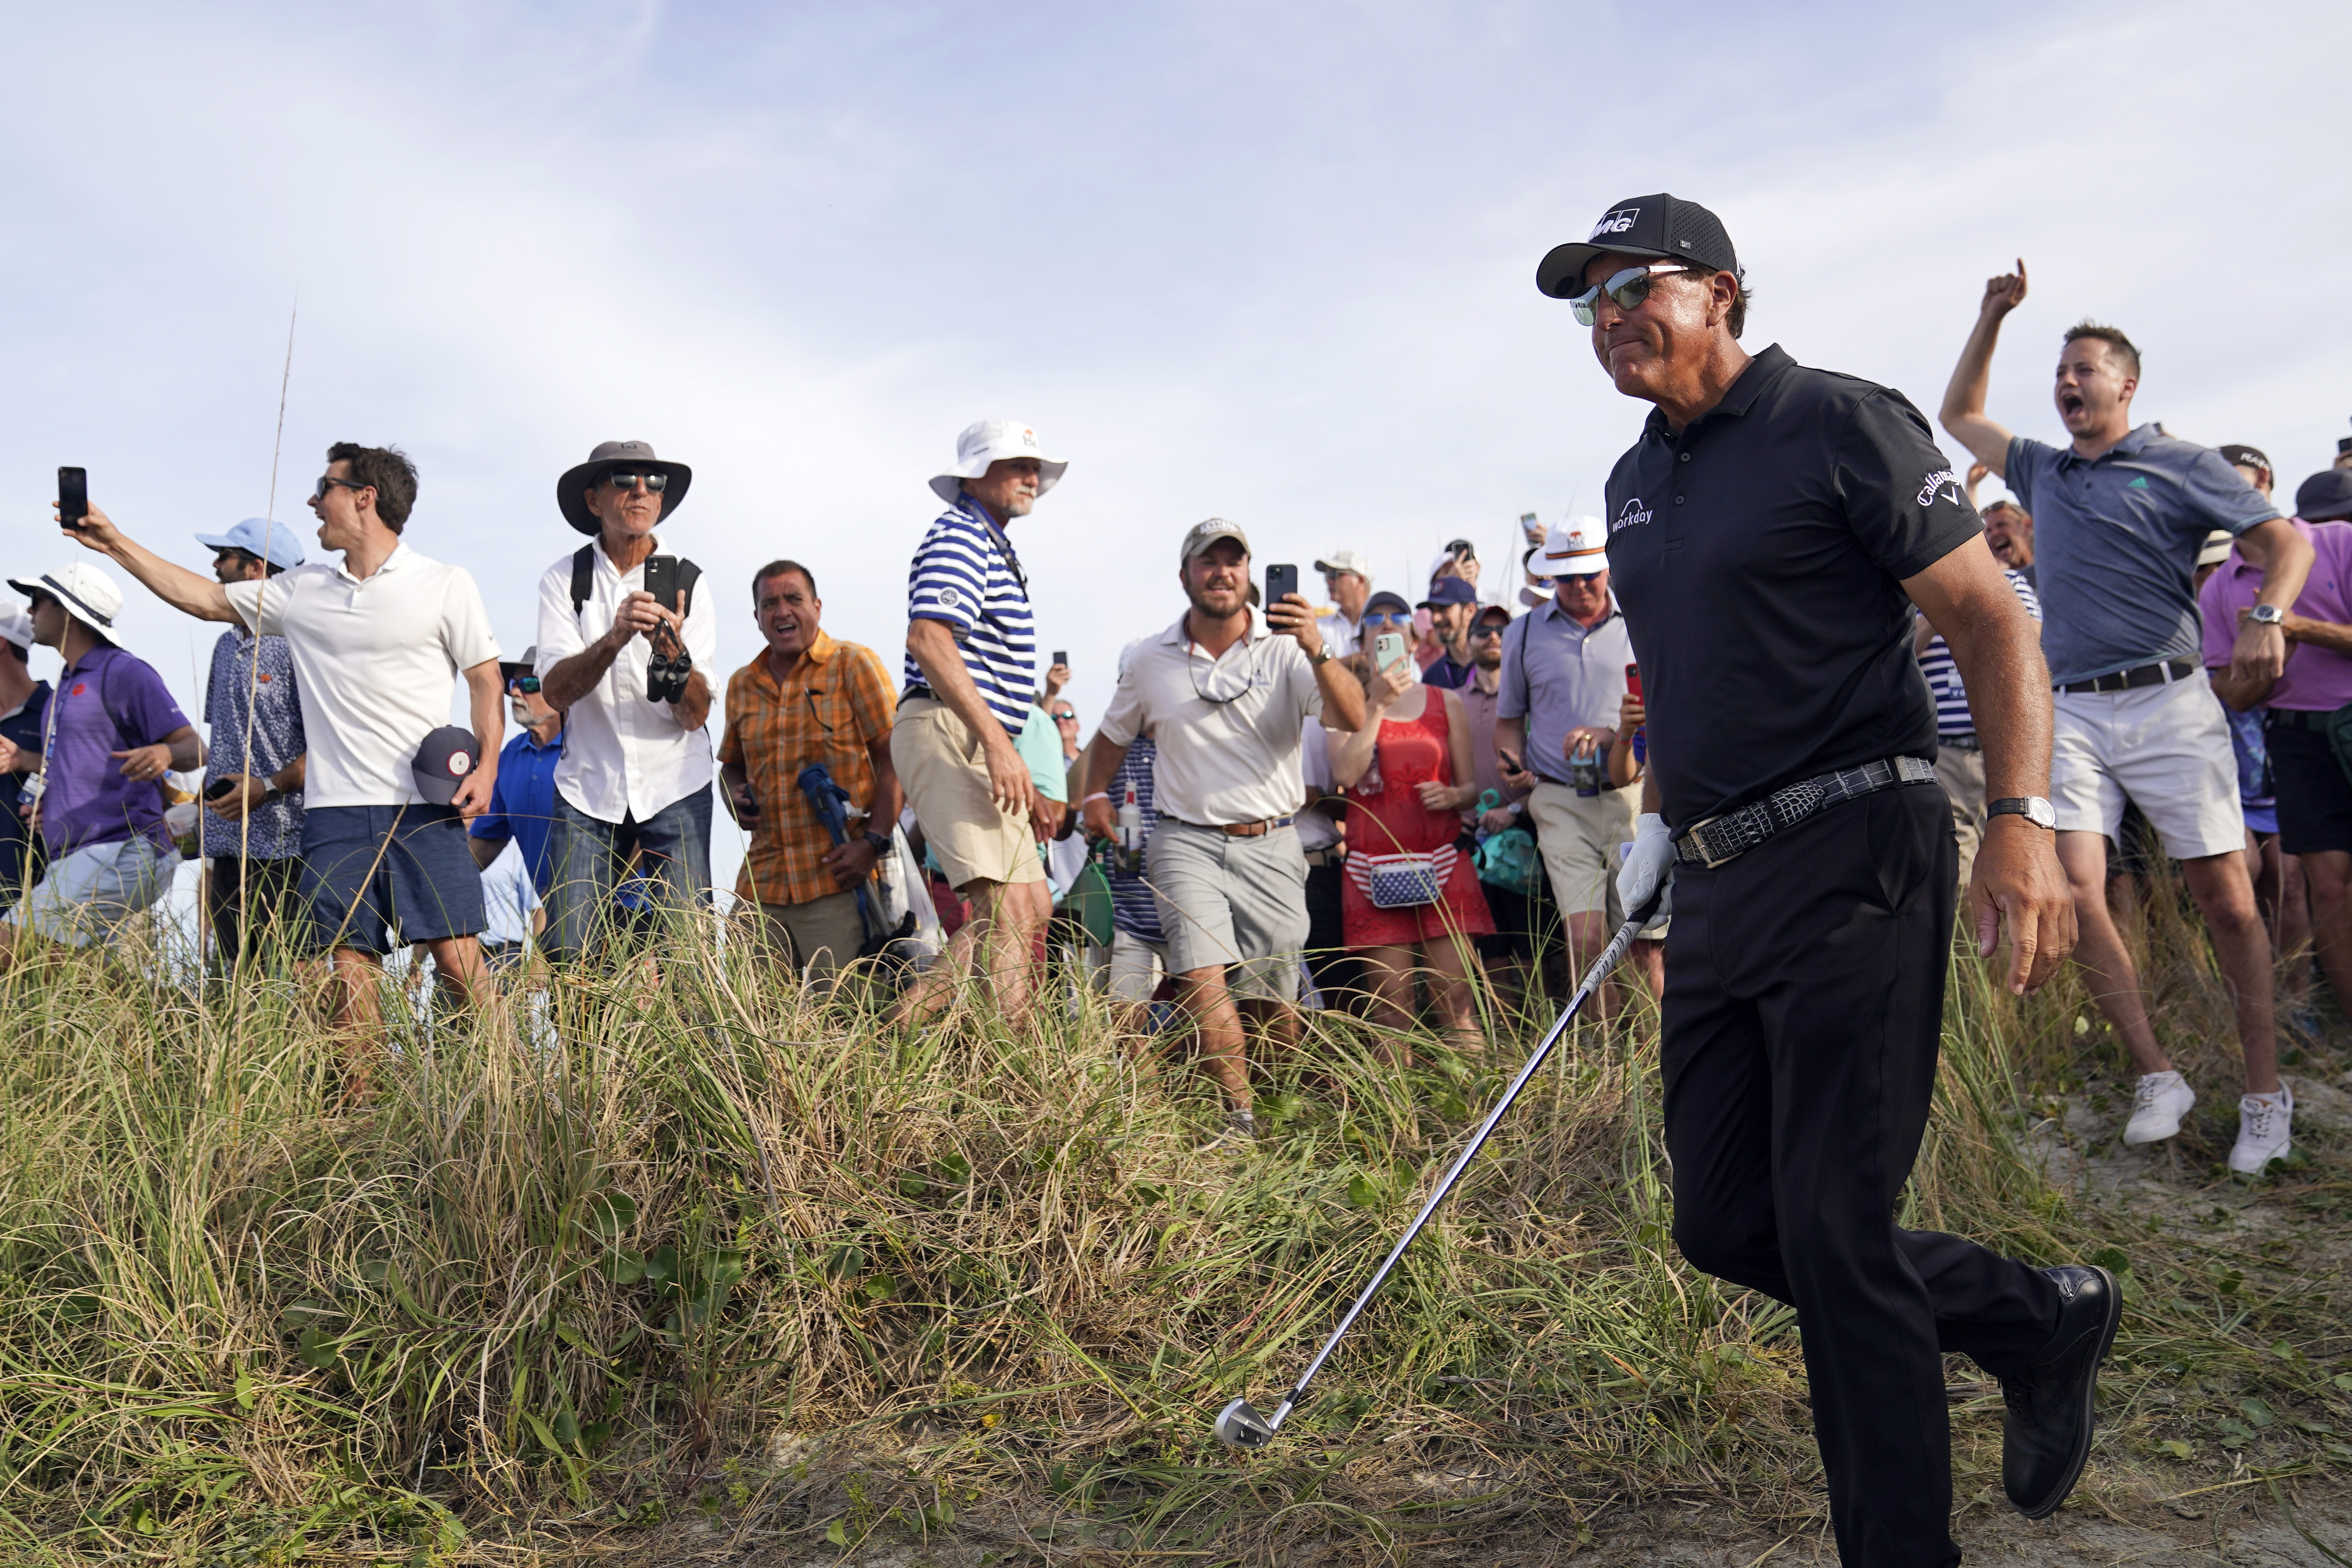 PGA Championship 2021 Final Round free live stream (5/23/21) How to watch, golf tee times, live updates Phil Mickelson, Brooks Koepka